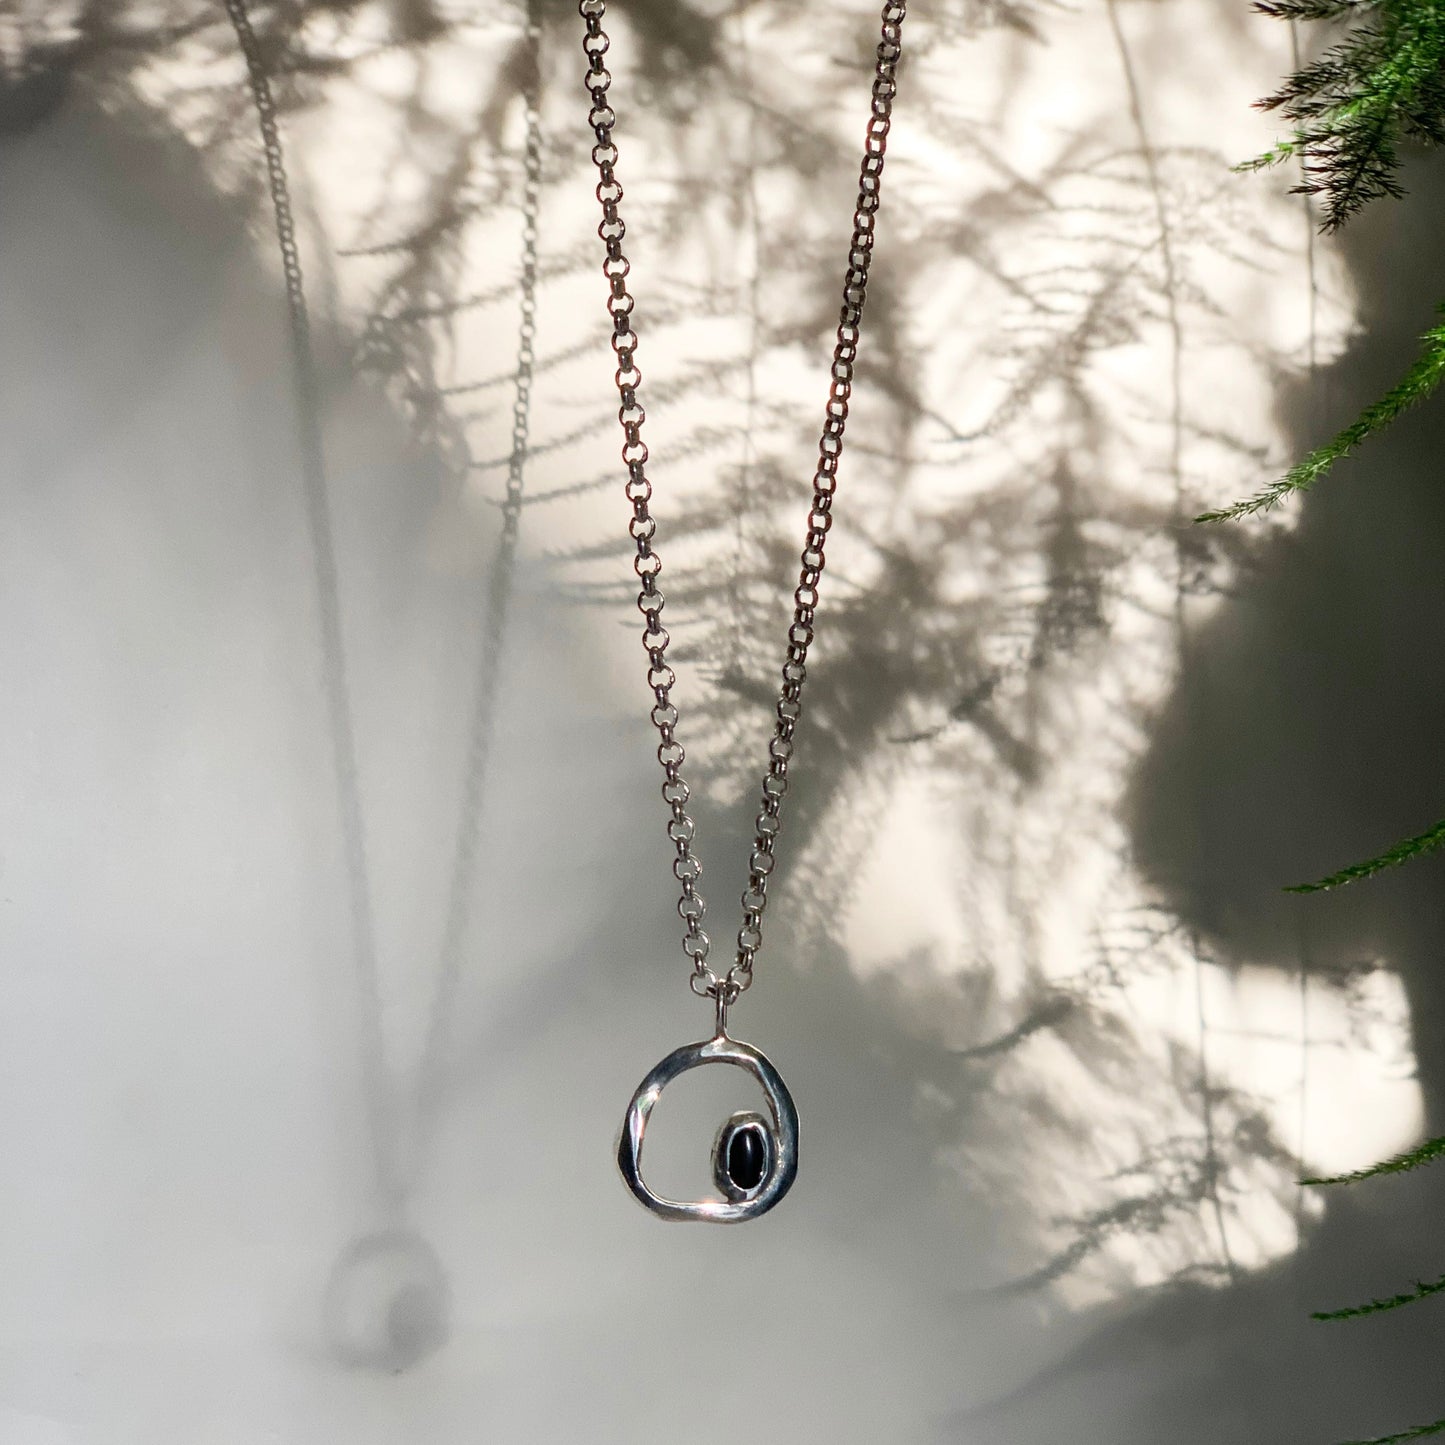 sterling silver pendant necklace with circular organic form pendant featuring an onyx gemstone set to bottom inner right hand corner